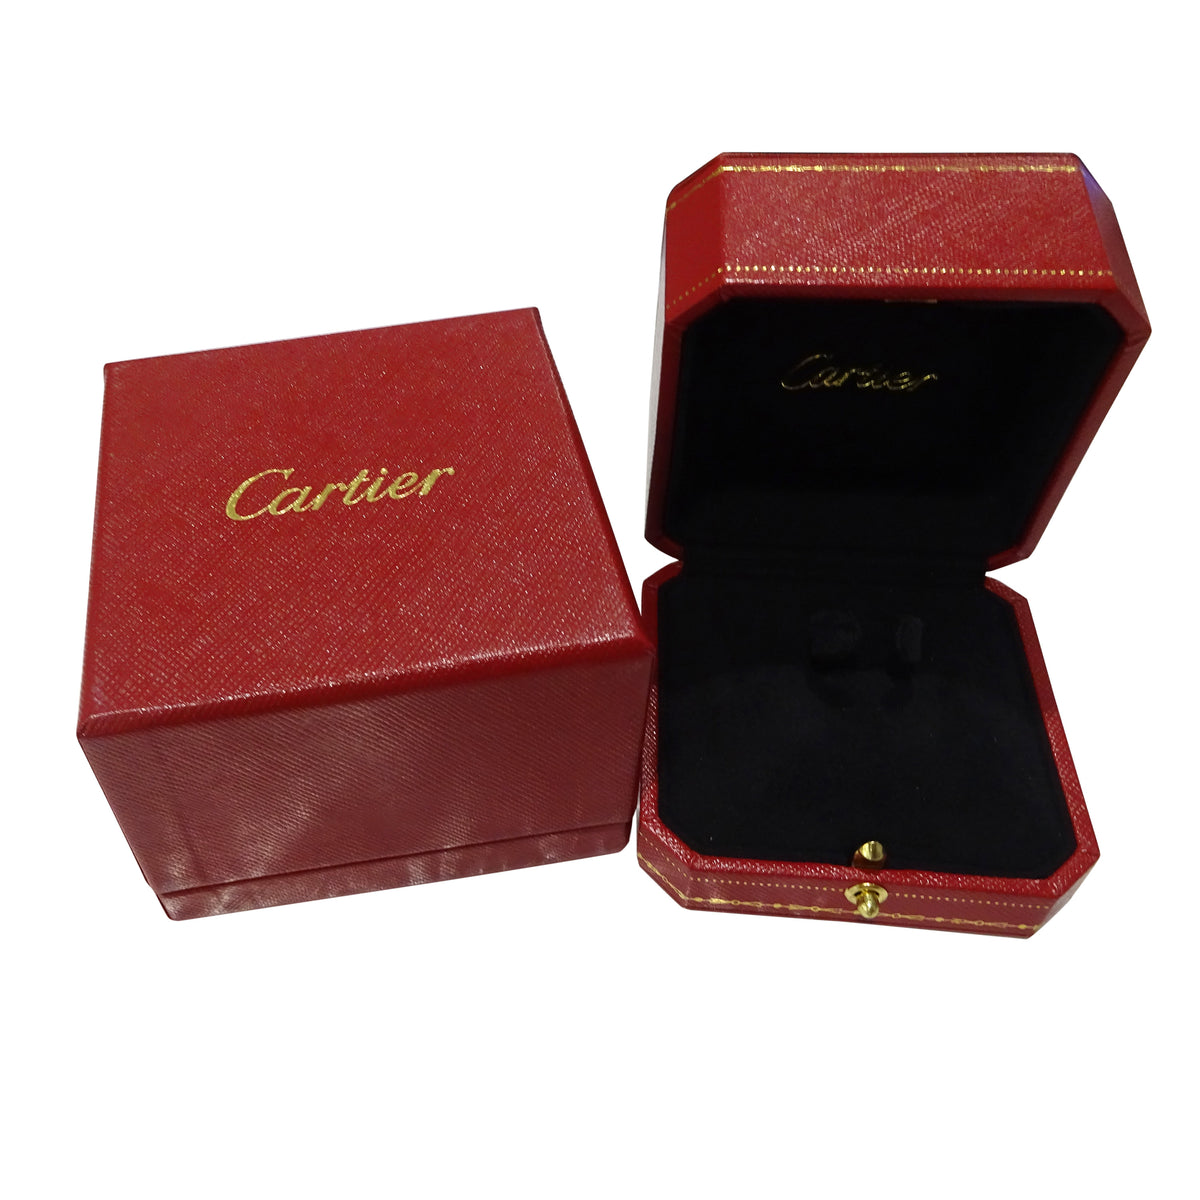 Cartier Juste Un Clou Diamond Ring in 18K Yellow Gold (Size 53)